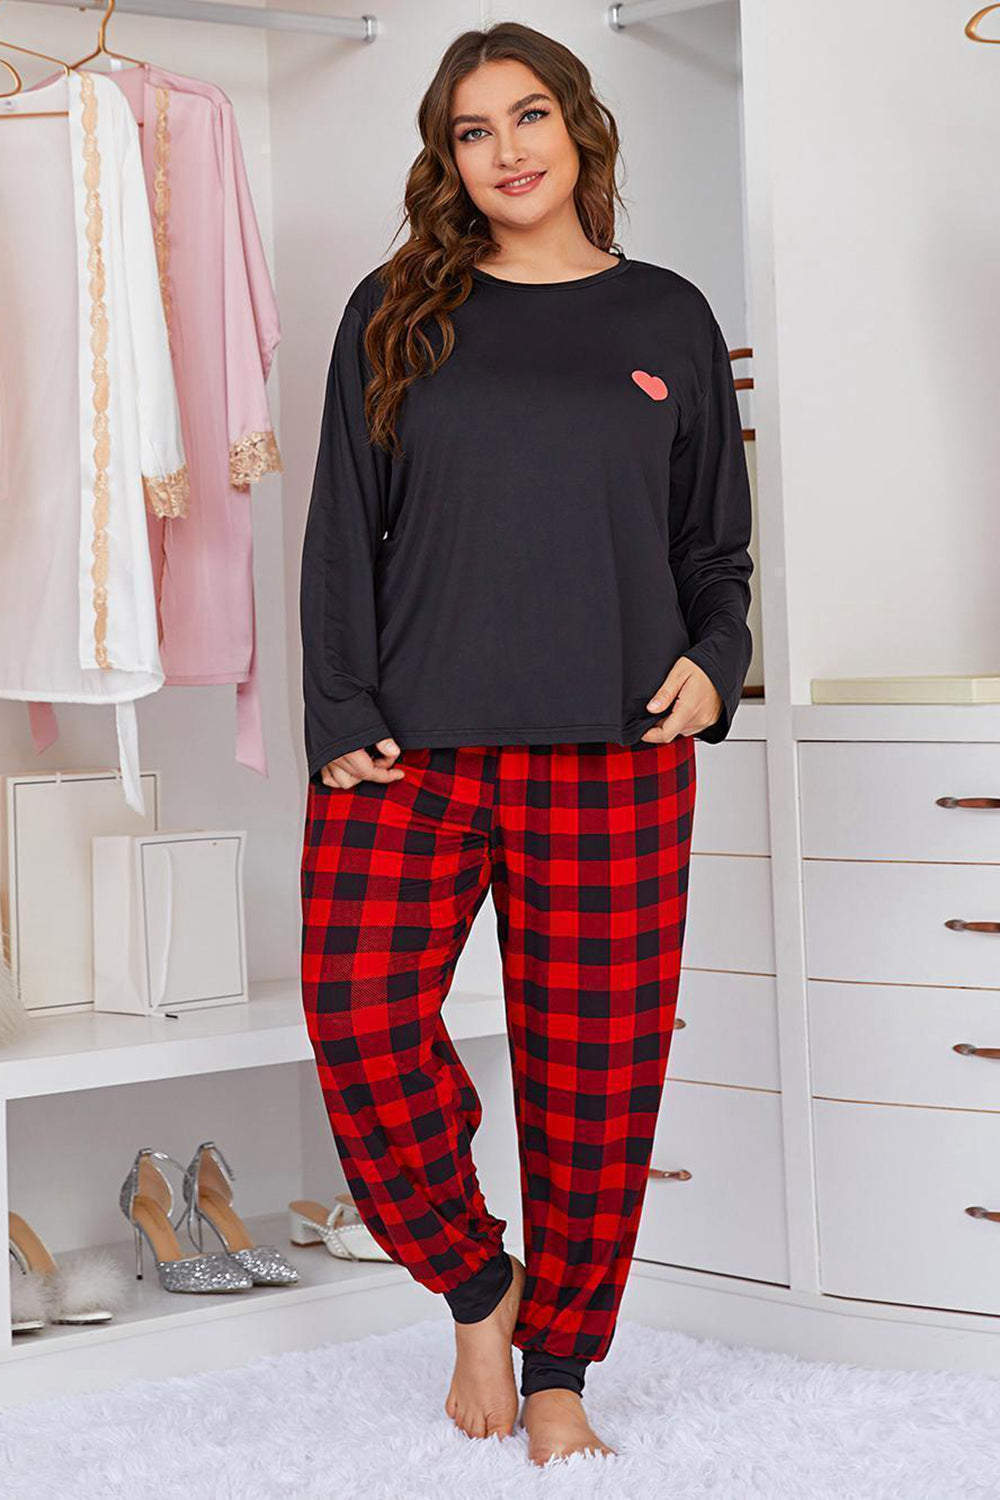 Plus Size Heart Graphic Top and Plaid Joggers Lounge Set  | KIKI COUTURE-Women's Clothing, Designer Fashions, Shoes, Bags